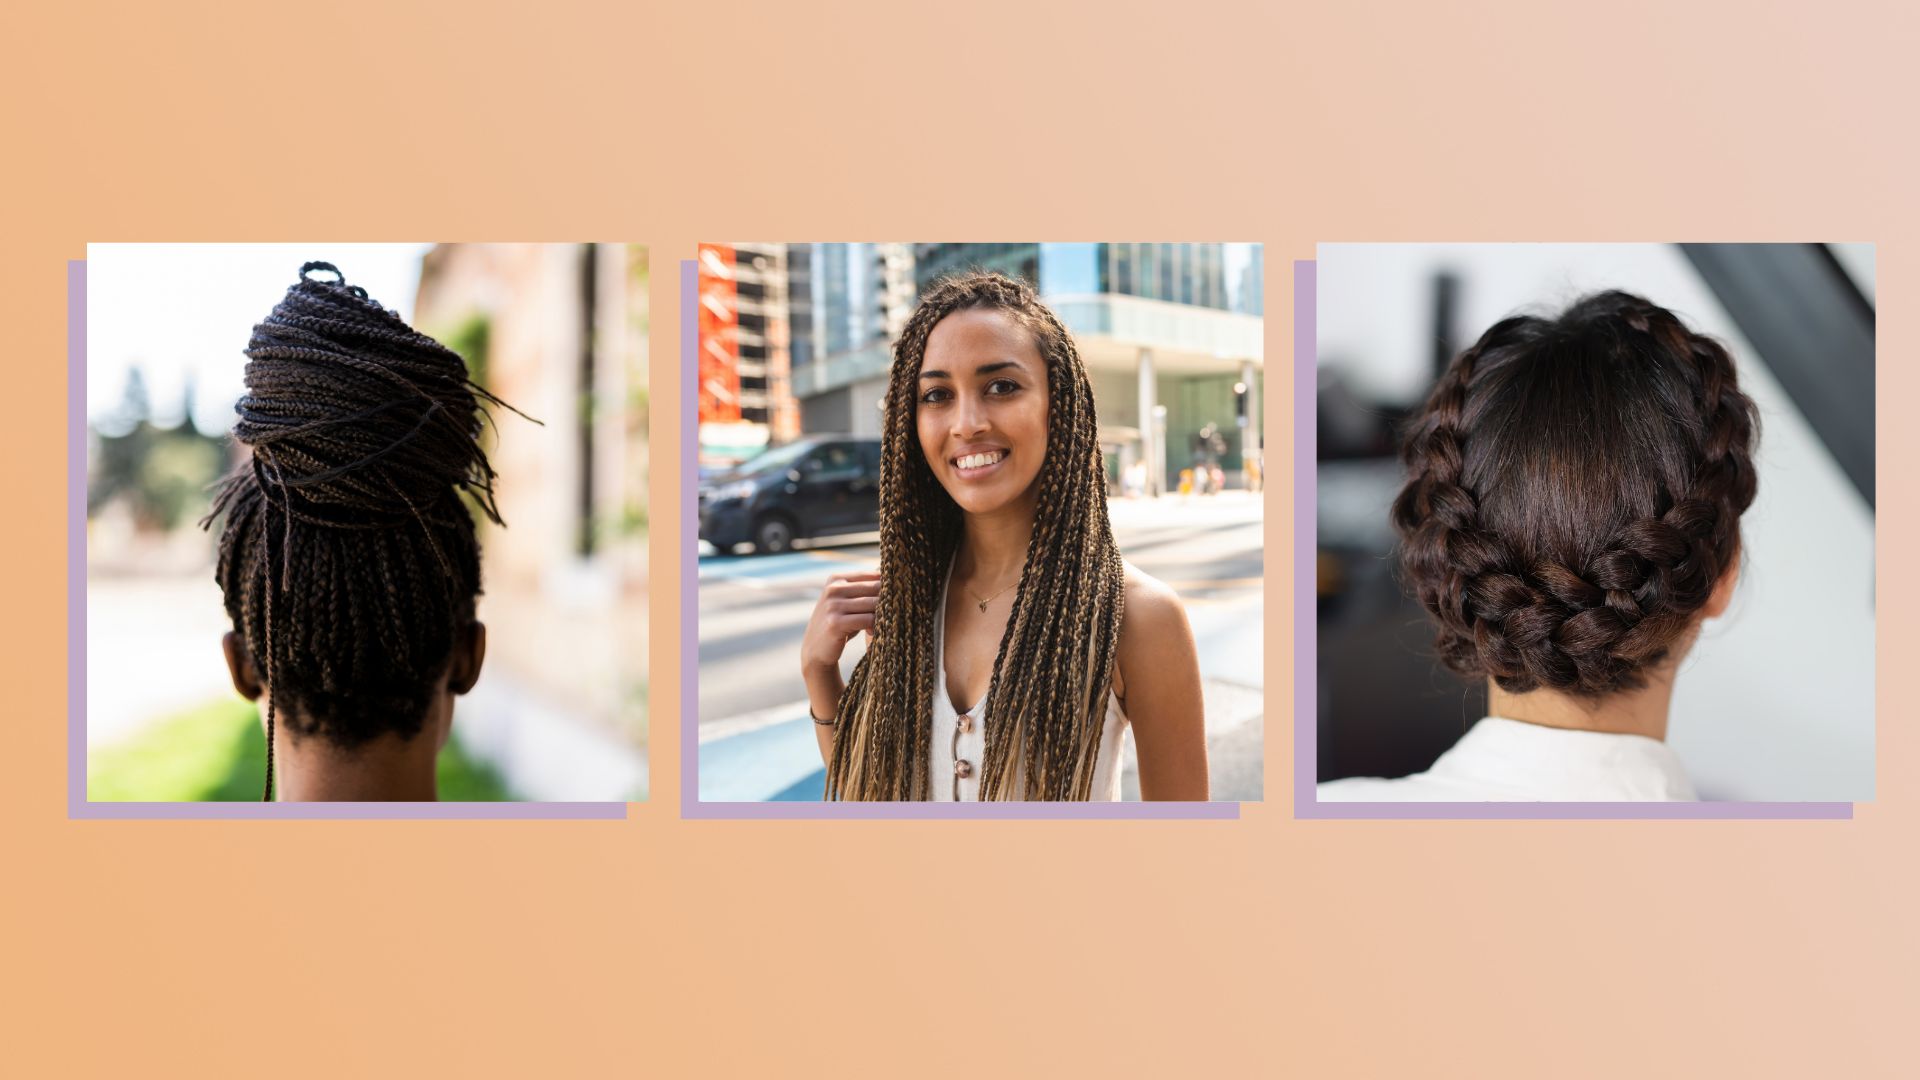 15 of The Best Braided Styles of 2022